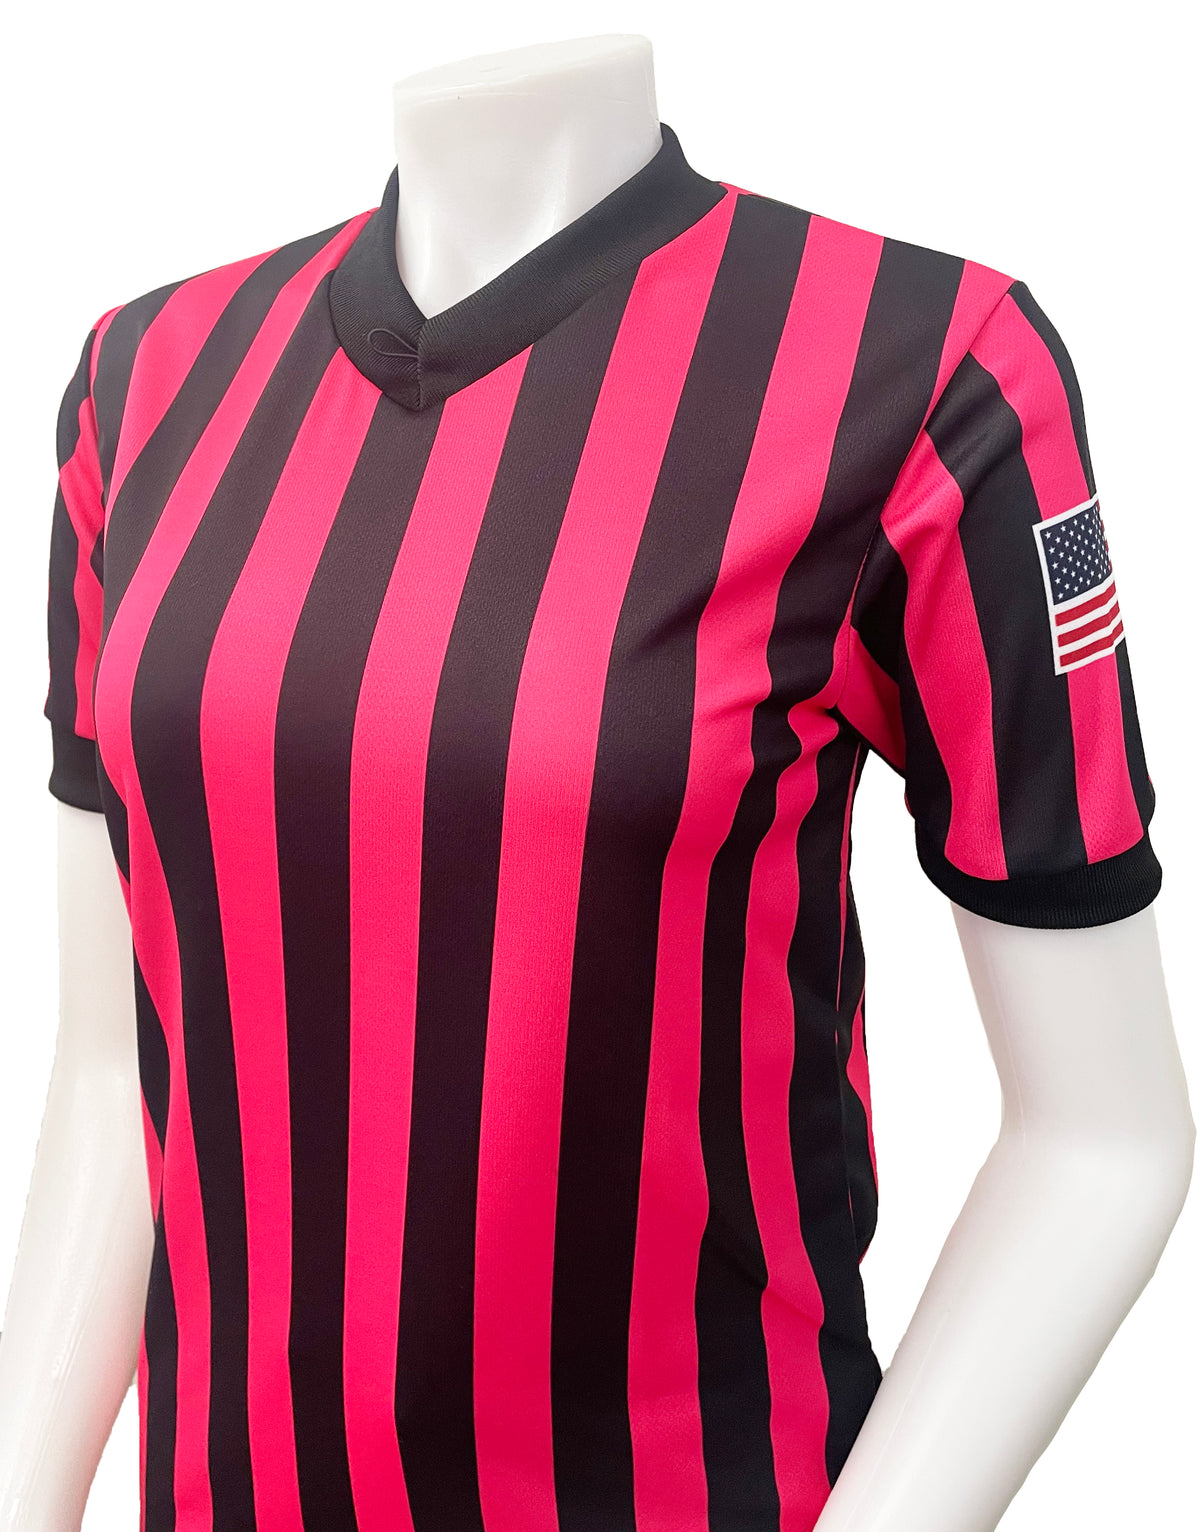 Smitty | USA-211-PINK | Women's Performance Mesh Pink Referee Shirt Sublimated Flag